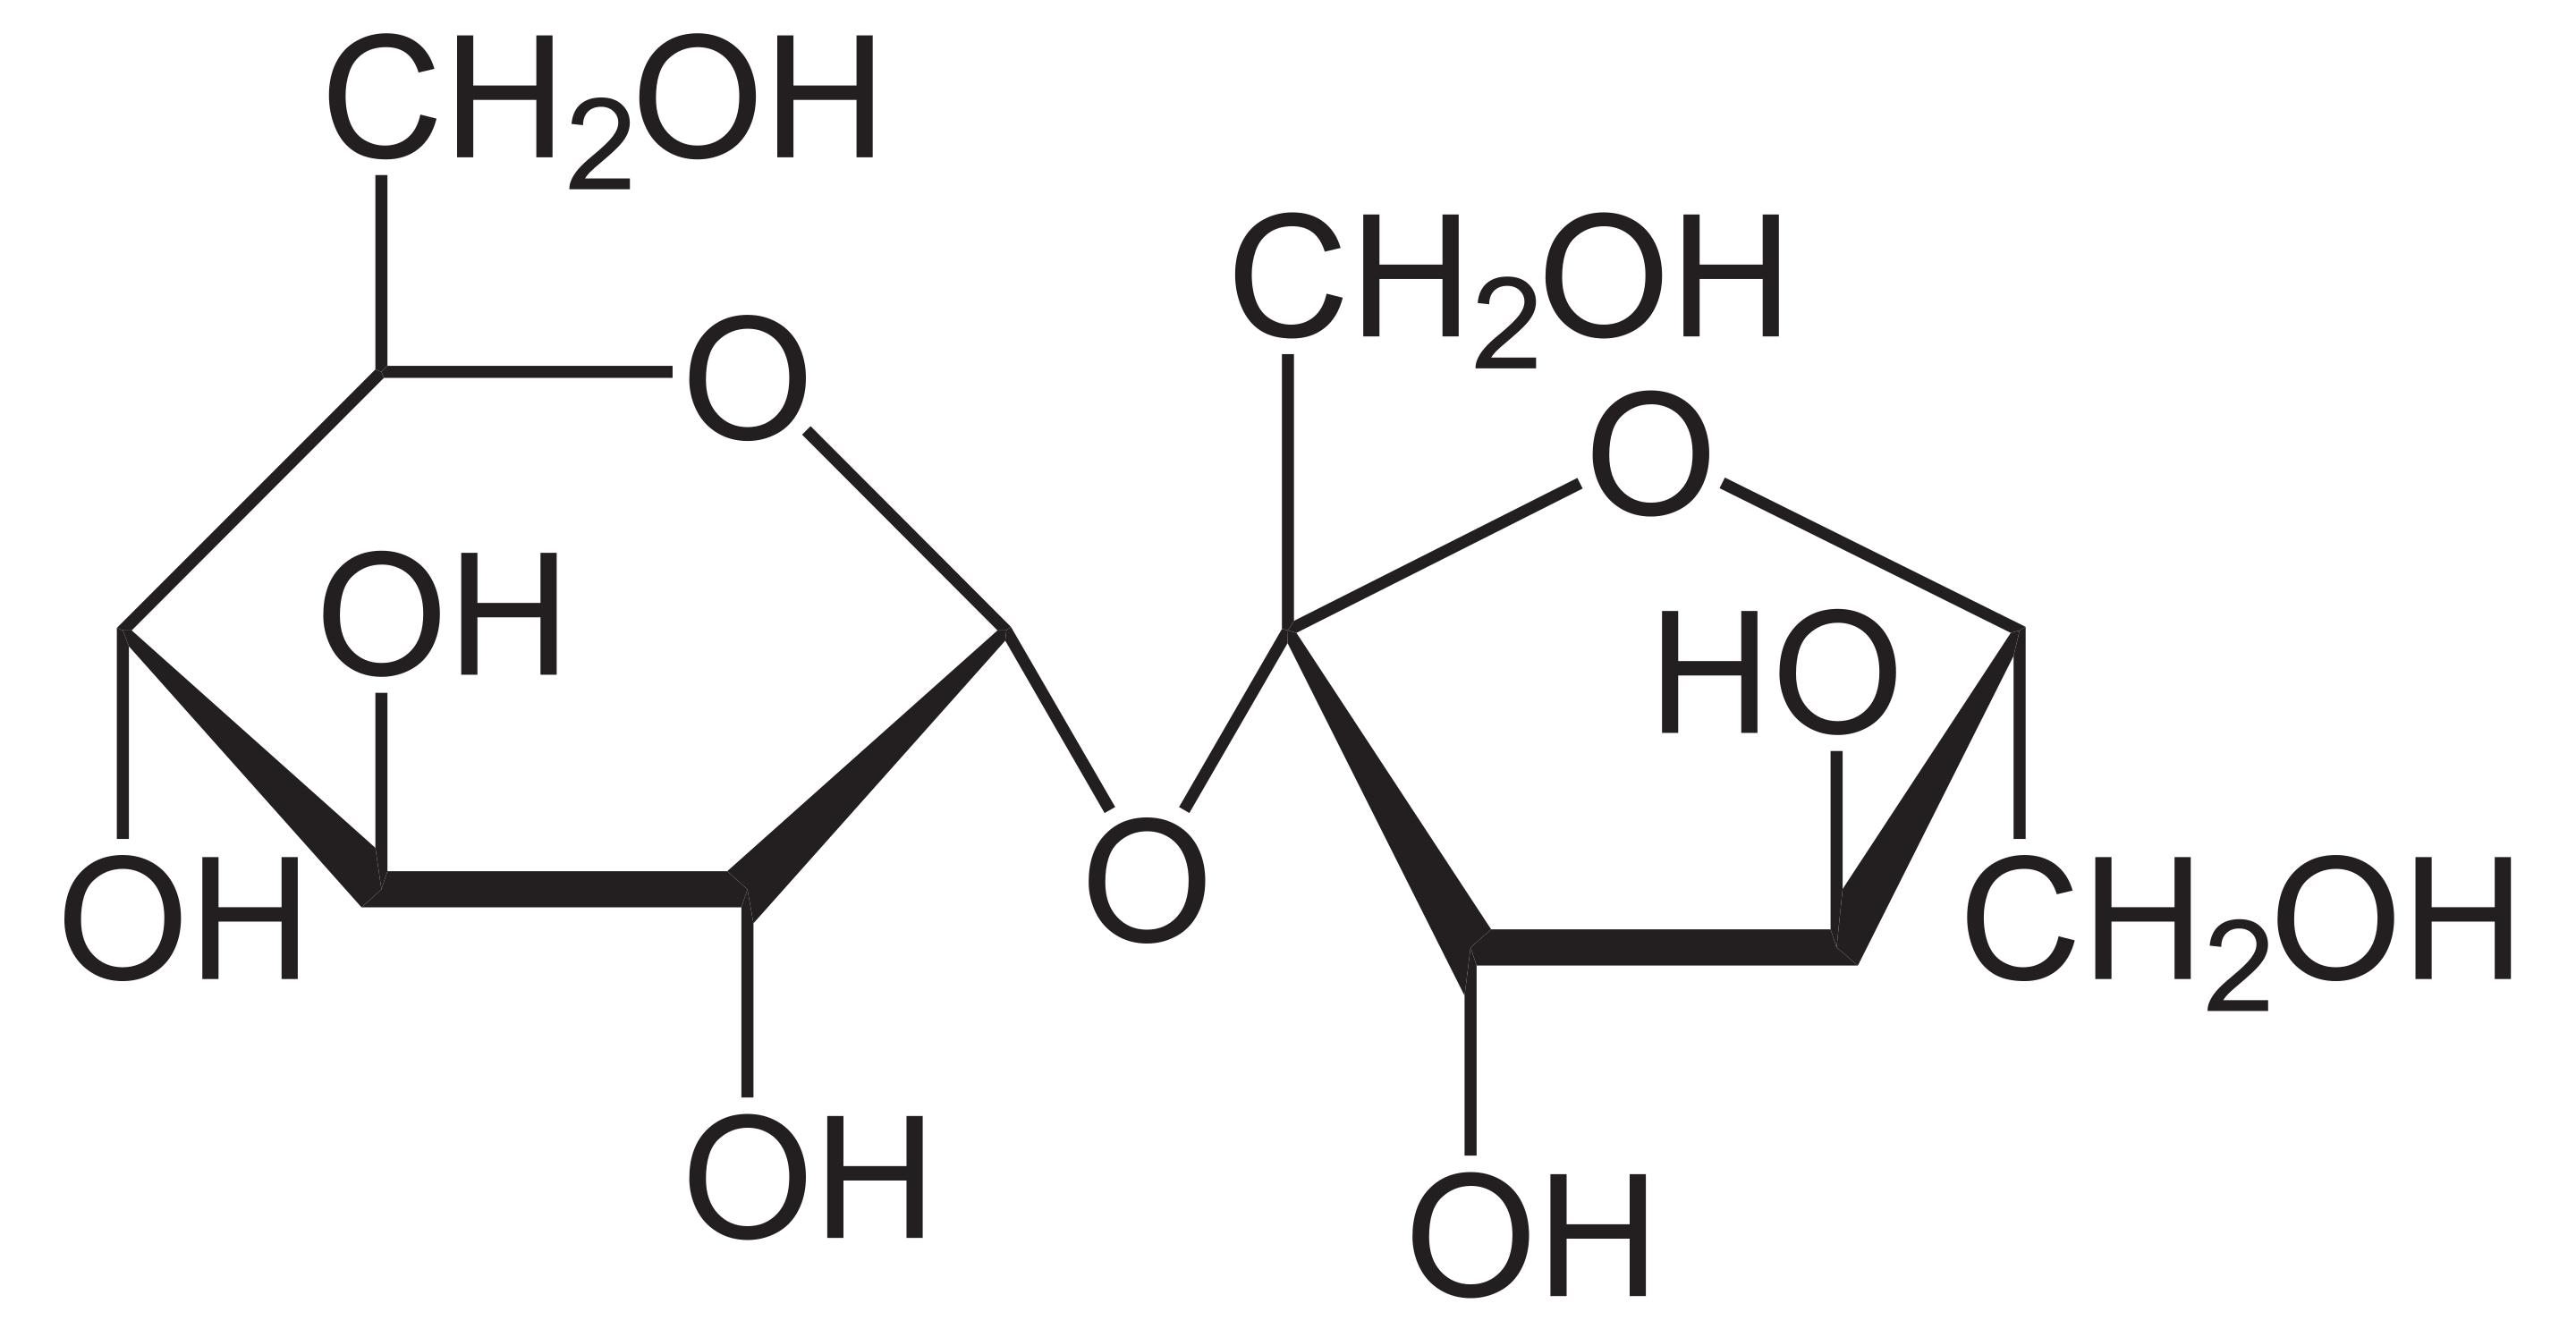 Hayworth projection of the chemical structure of sucrose.